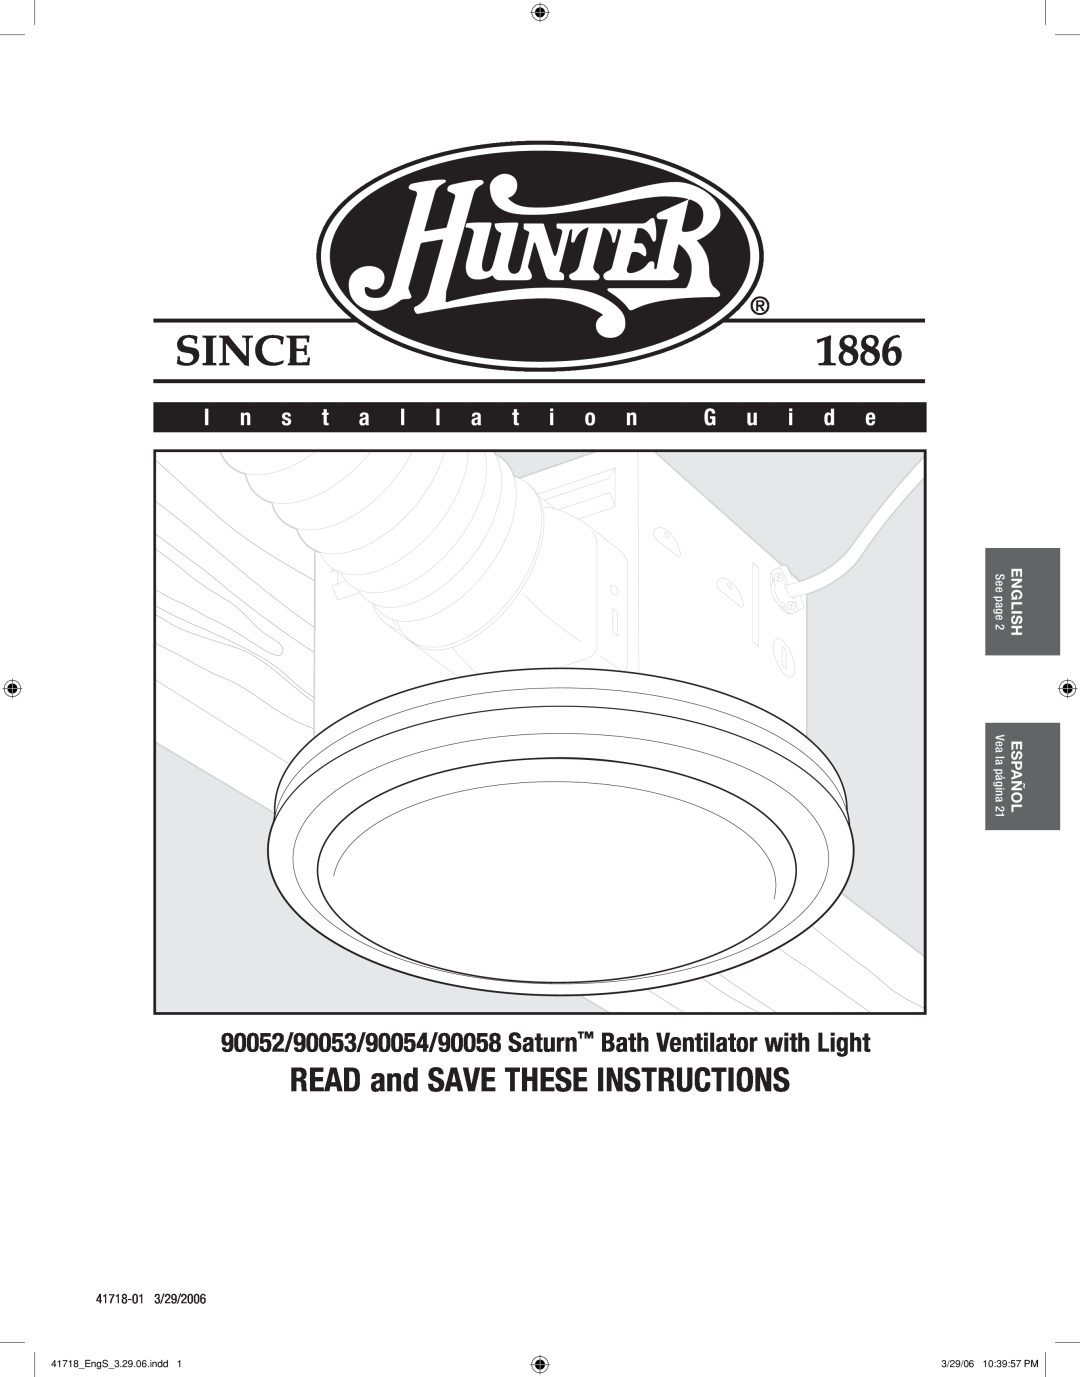 Hunter Fan manual READ and SAVE THESE INSTRUCTIONS, 90052/90053/90054/90058 Saturn Bath Ventilator with Light, psEolñ 